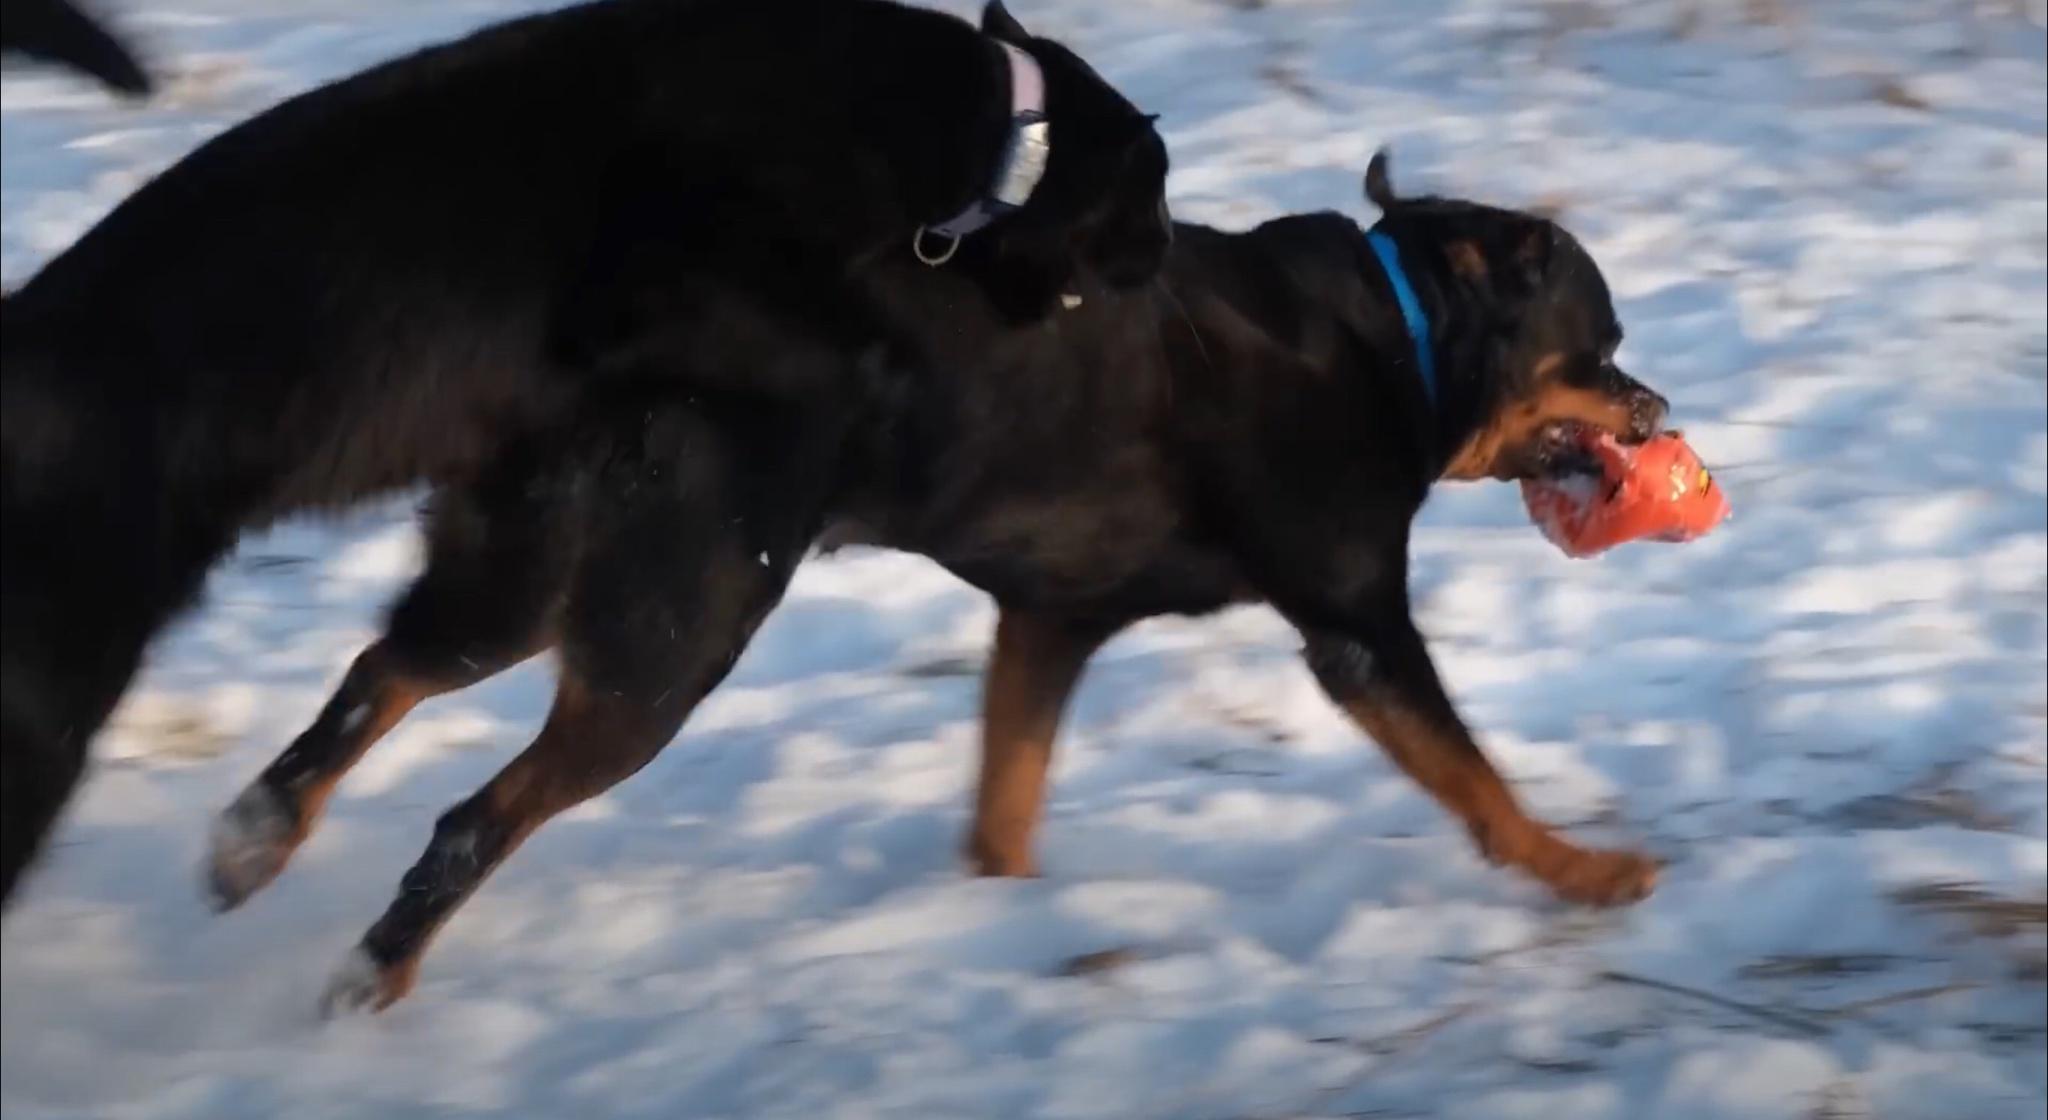 Panther Luna and her Rottweiler buddy Venza having fun with